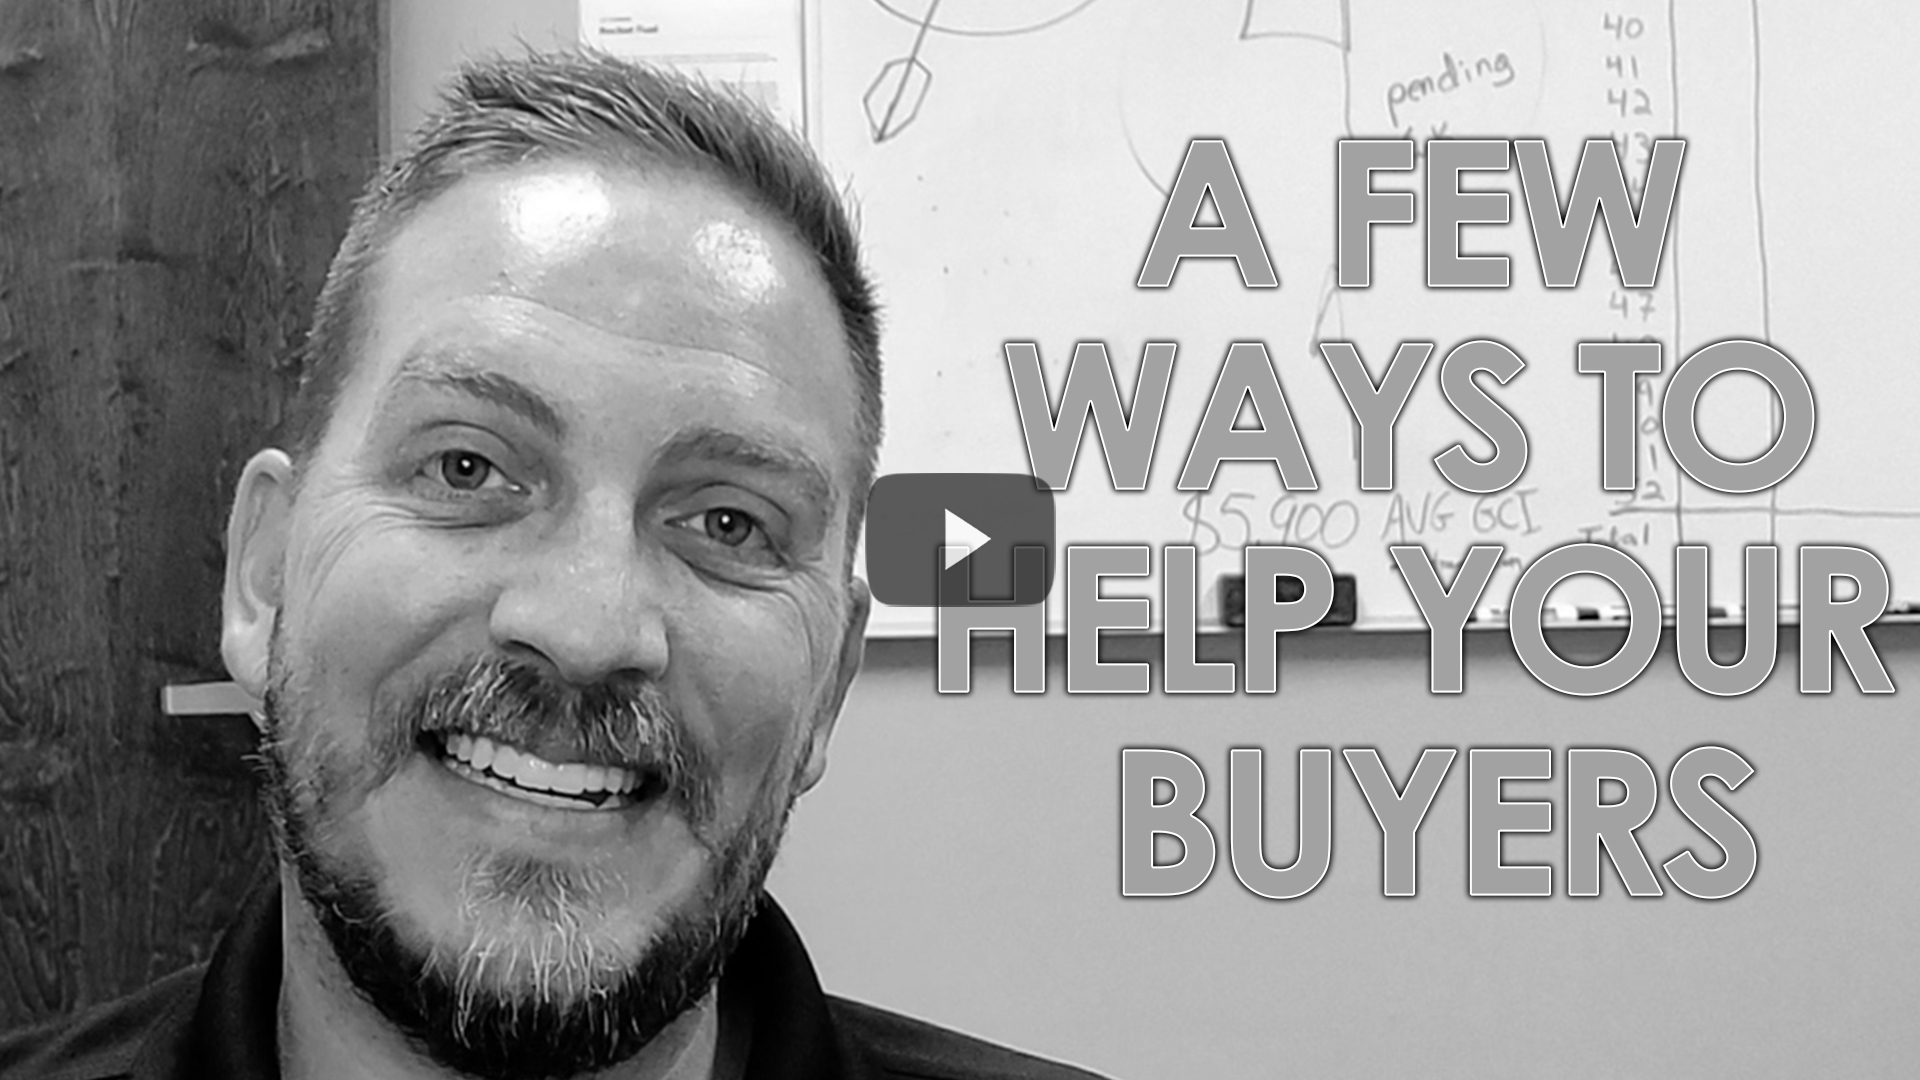 How To Provide Better Service to Buyers